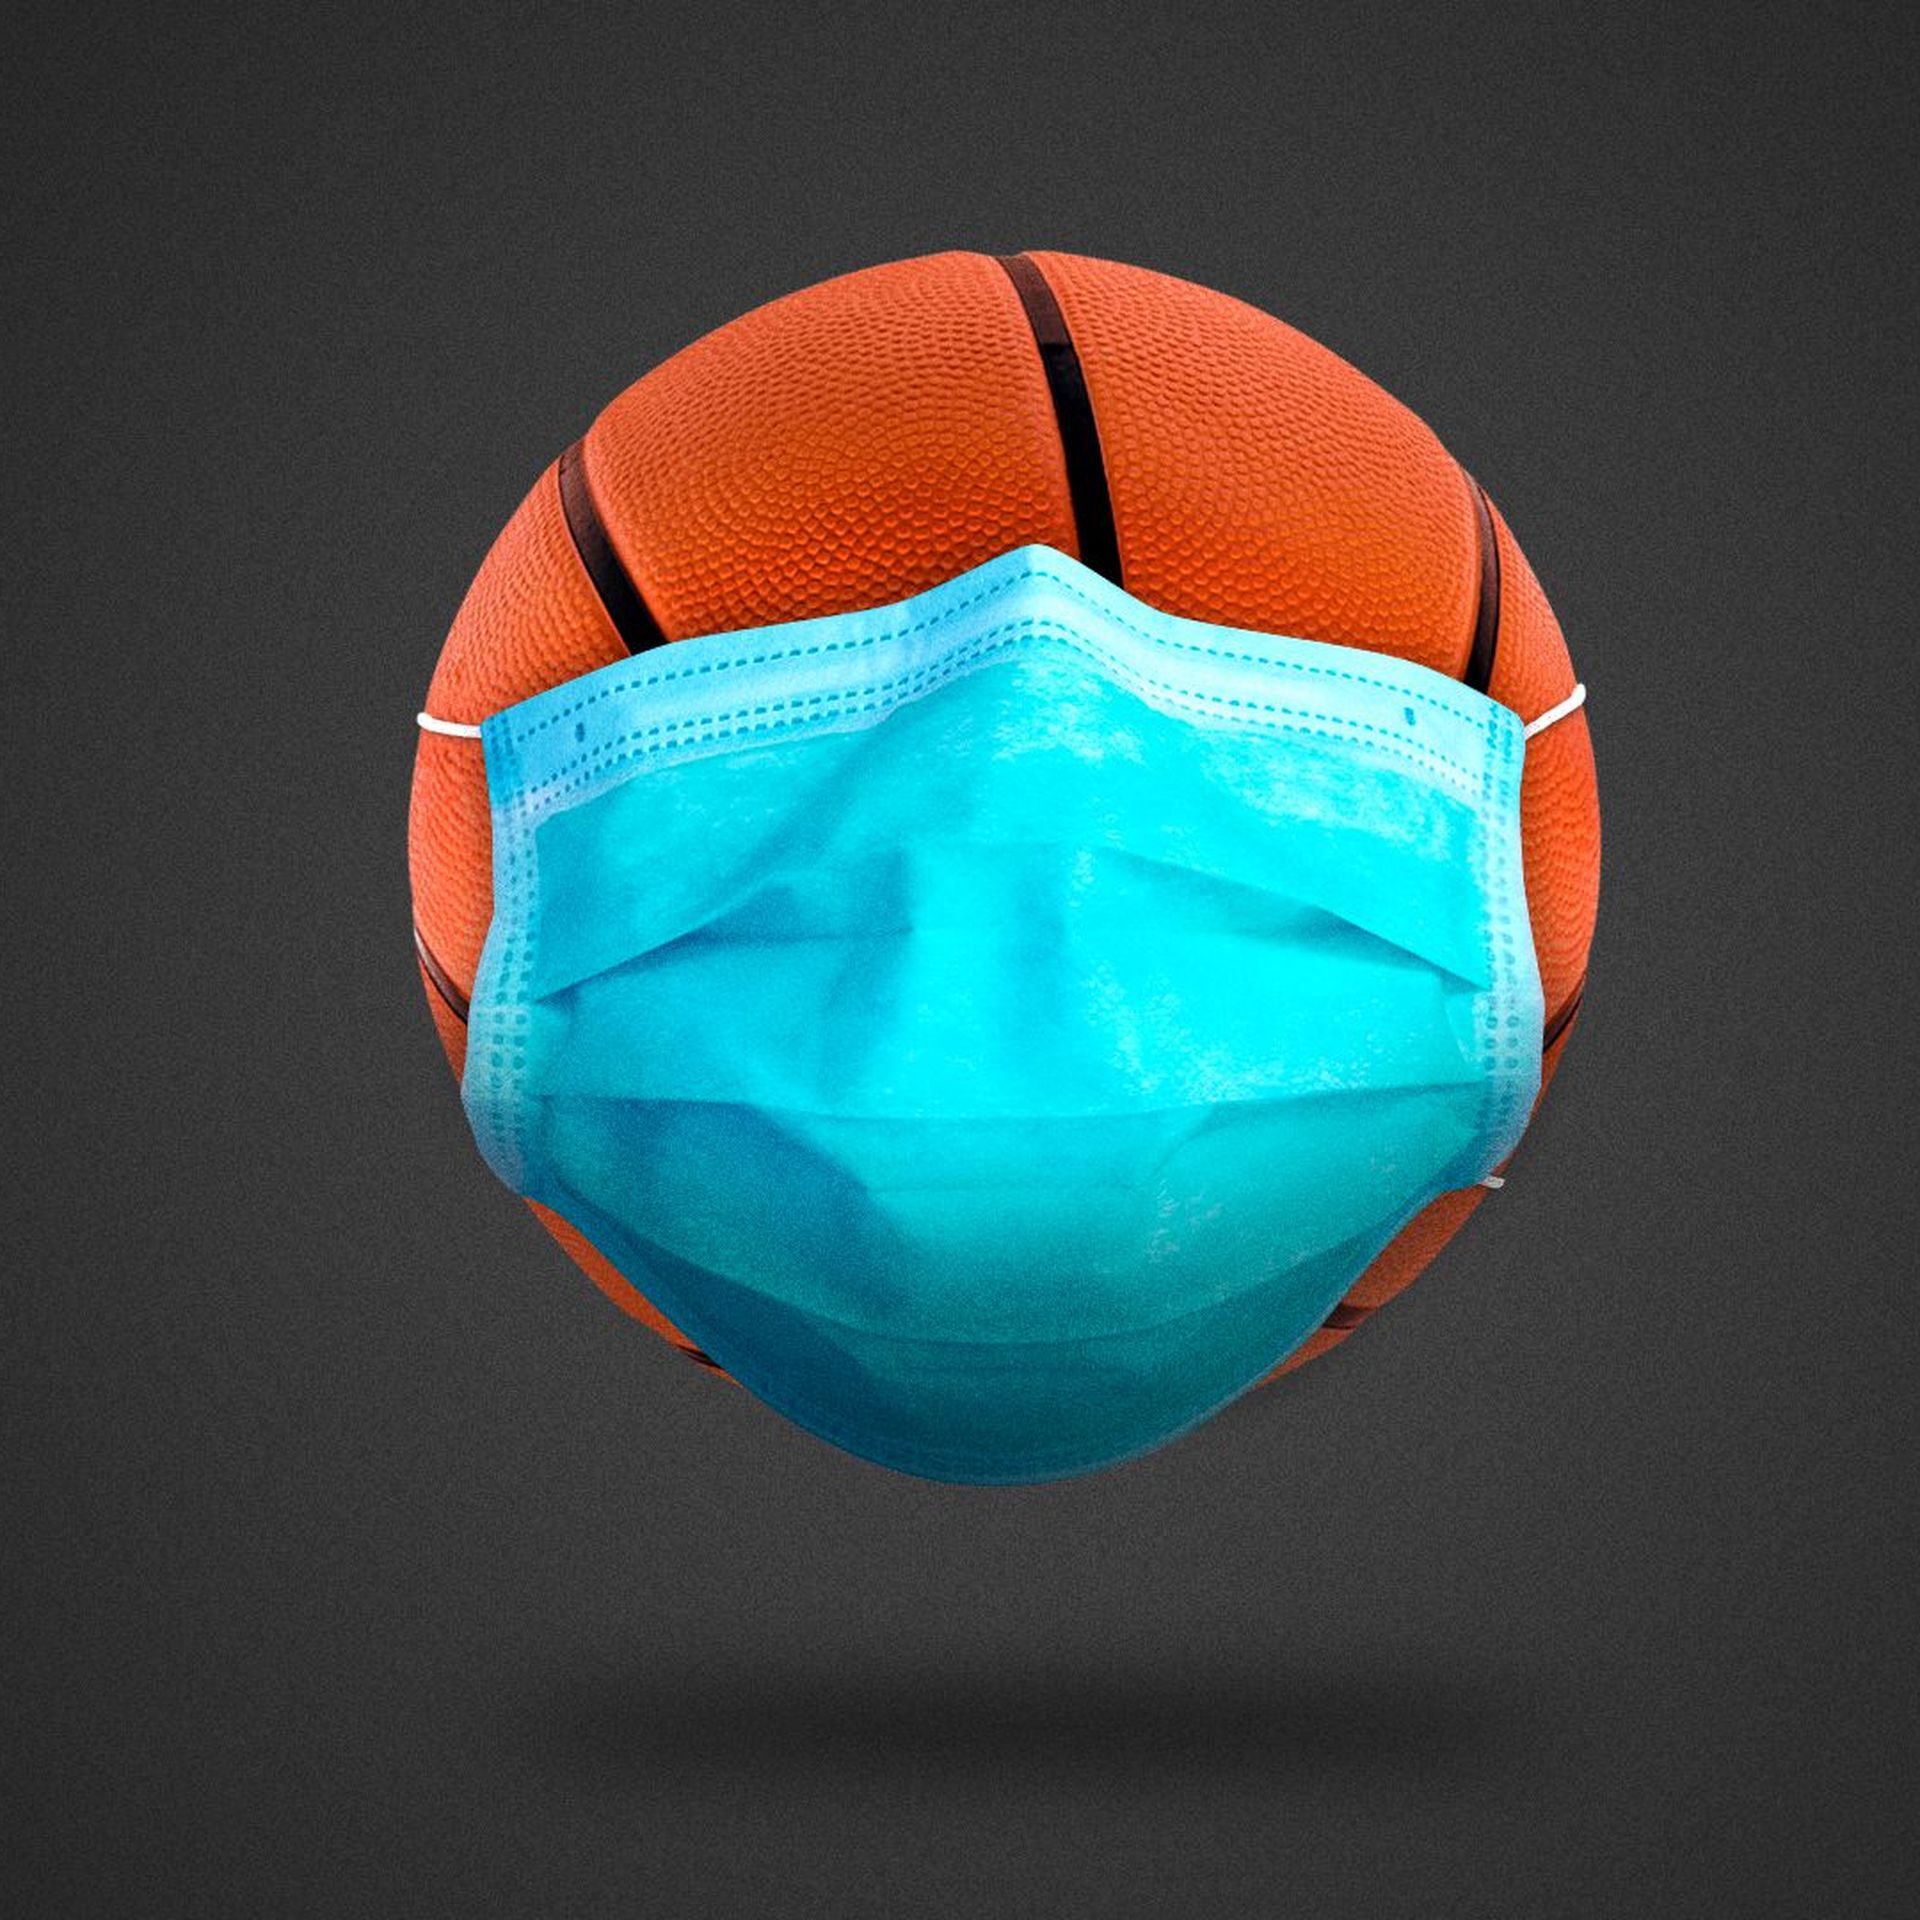 Illustration of basketball wearing a face mask